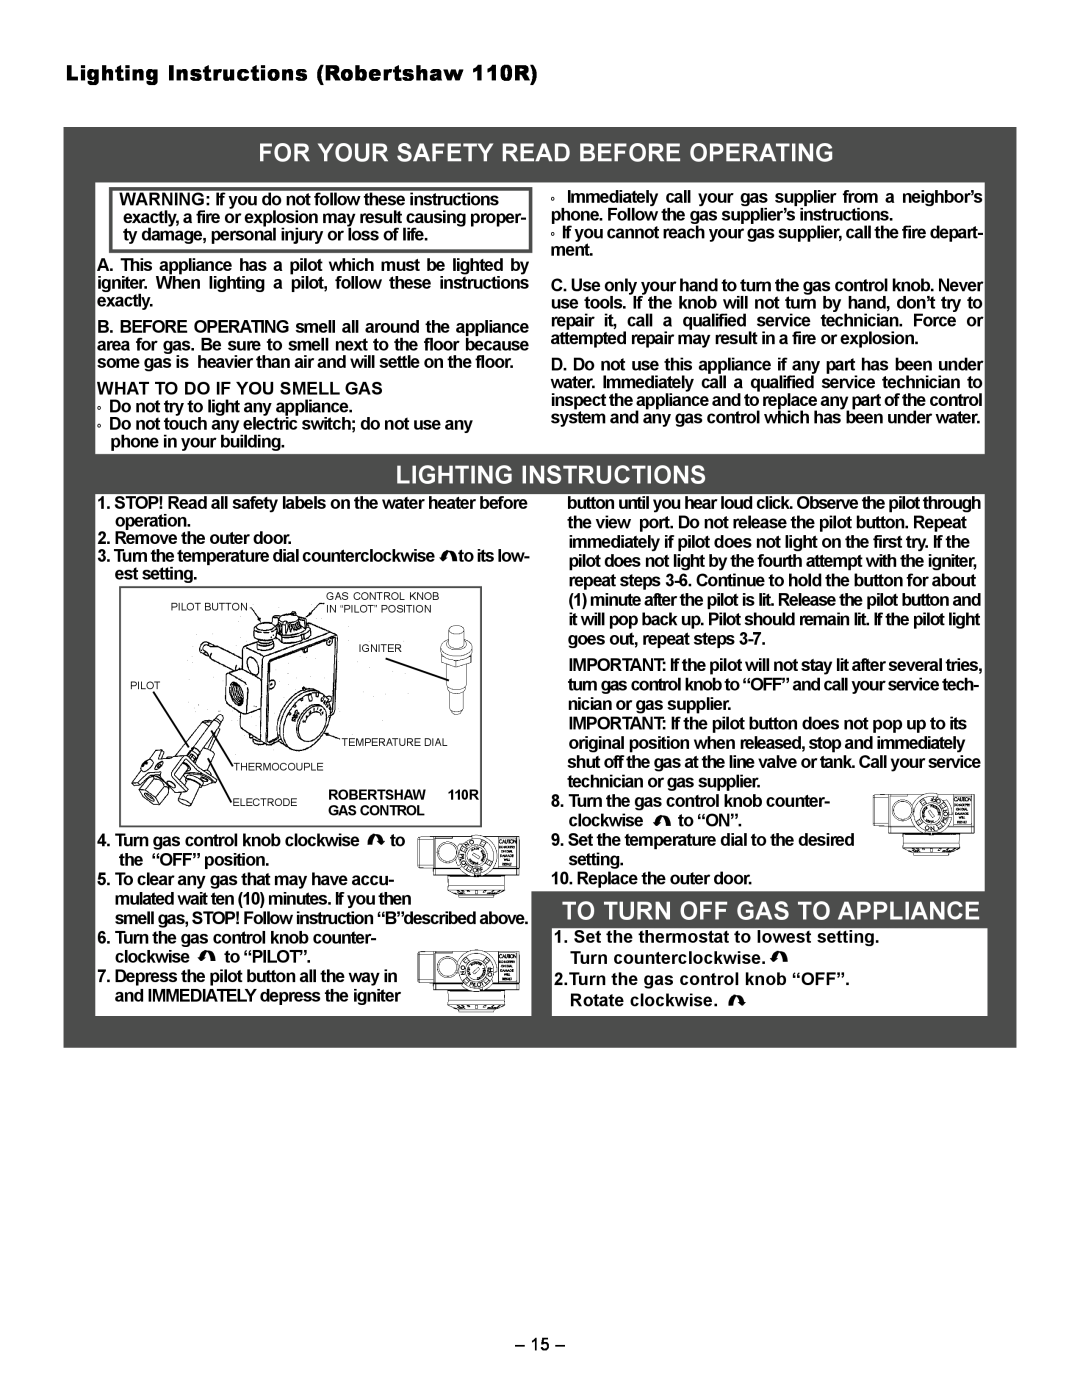 GSW 72090 manual For Your Safety Read Before Operating, Lighting Instructions, To Turn Off Gas To Appliance 